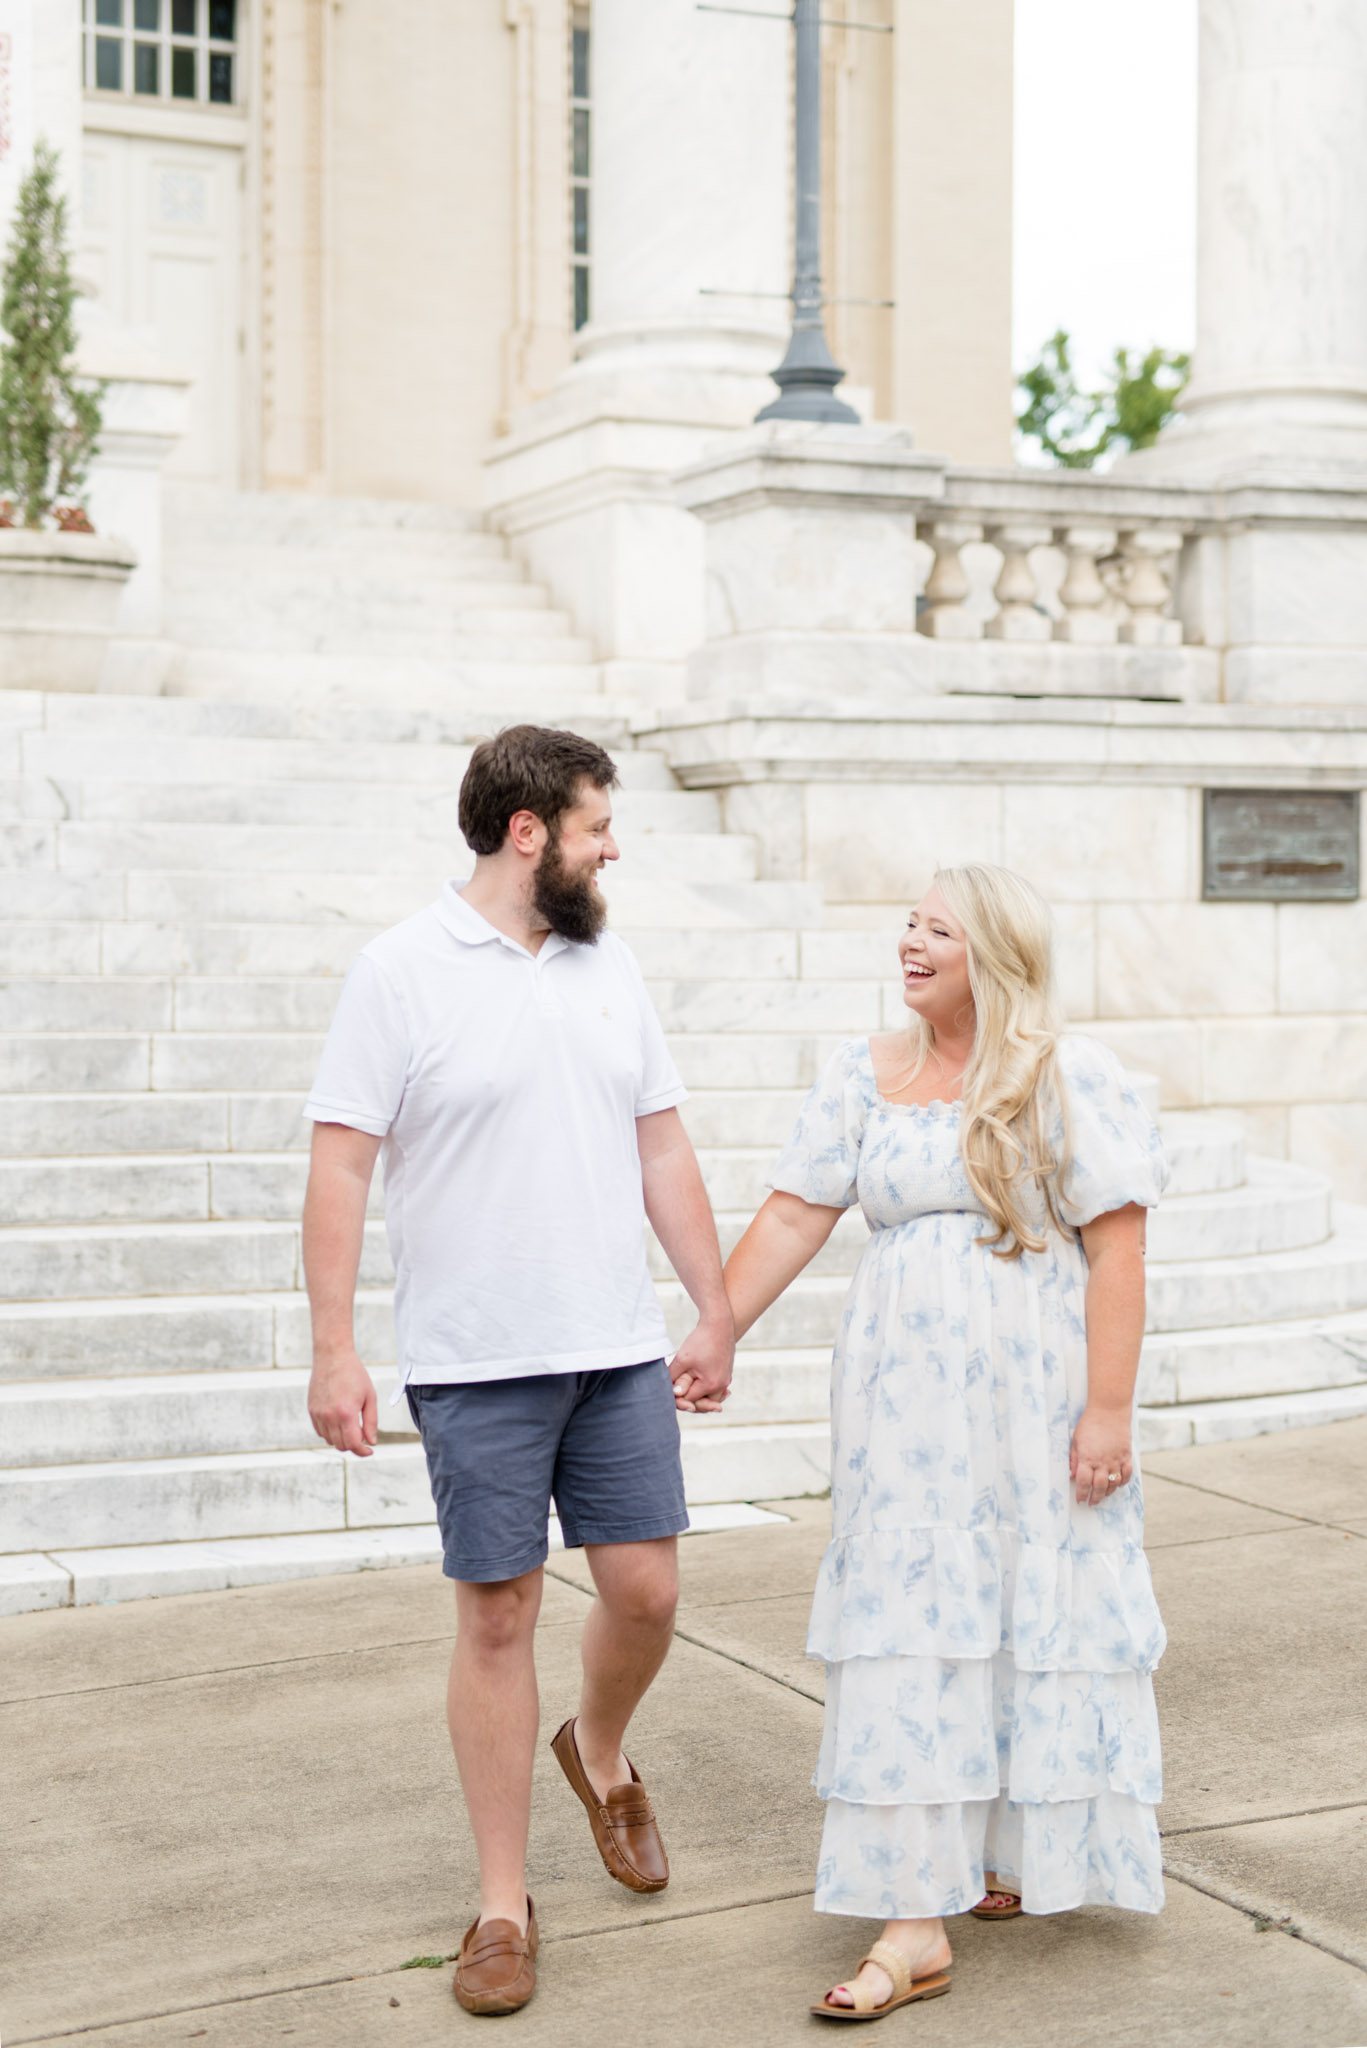 Couple walks together in front of white stairs.